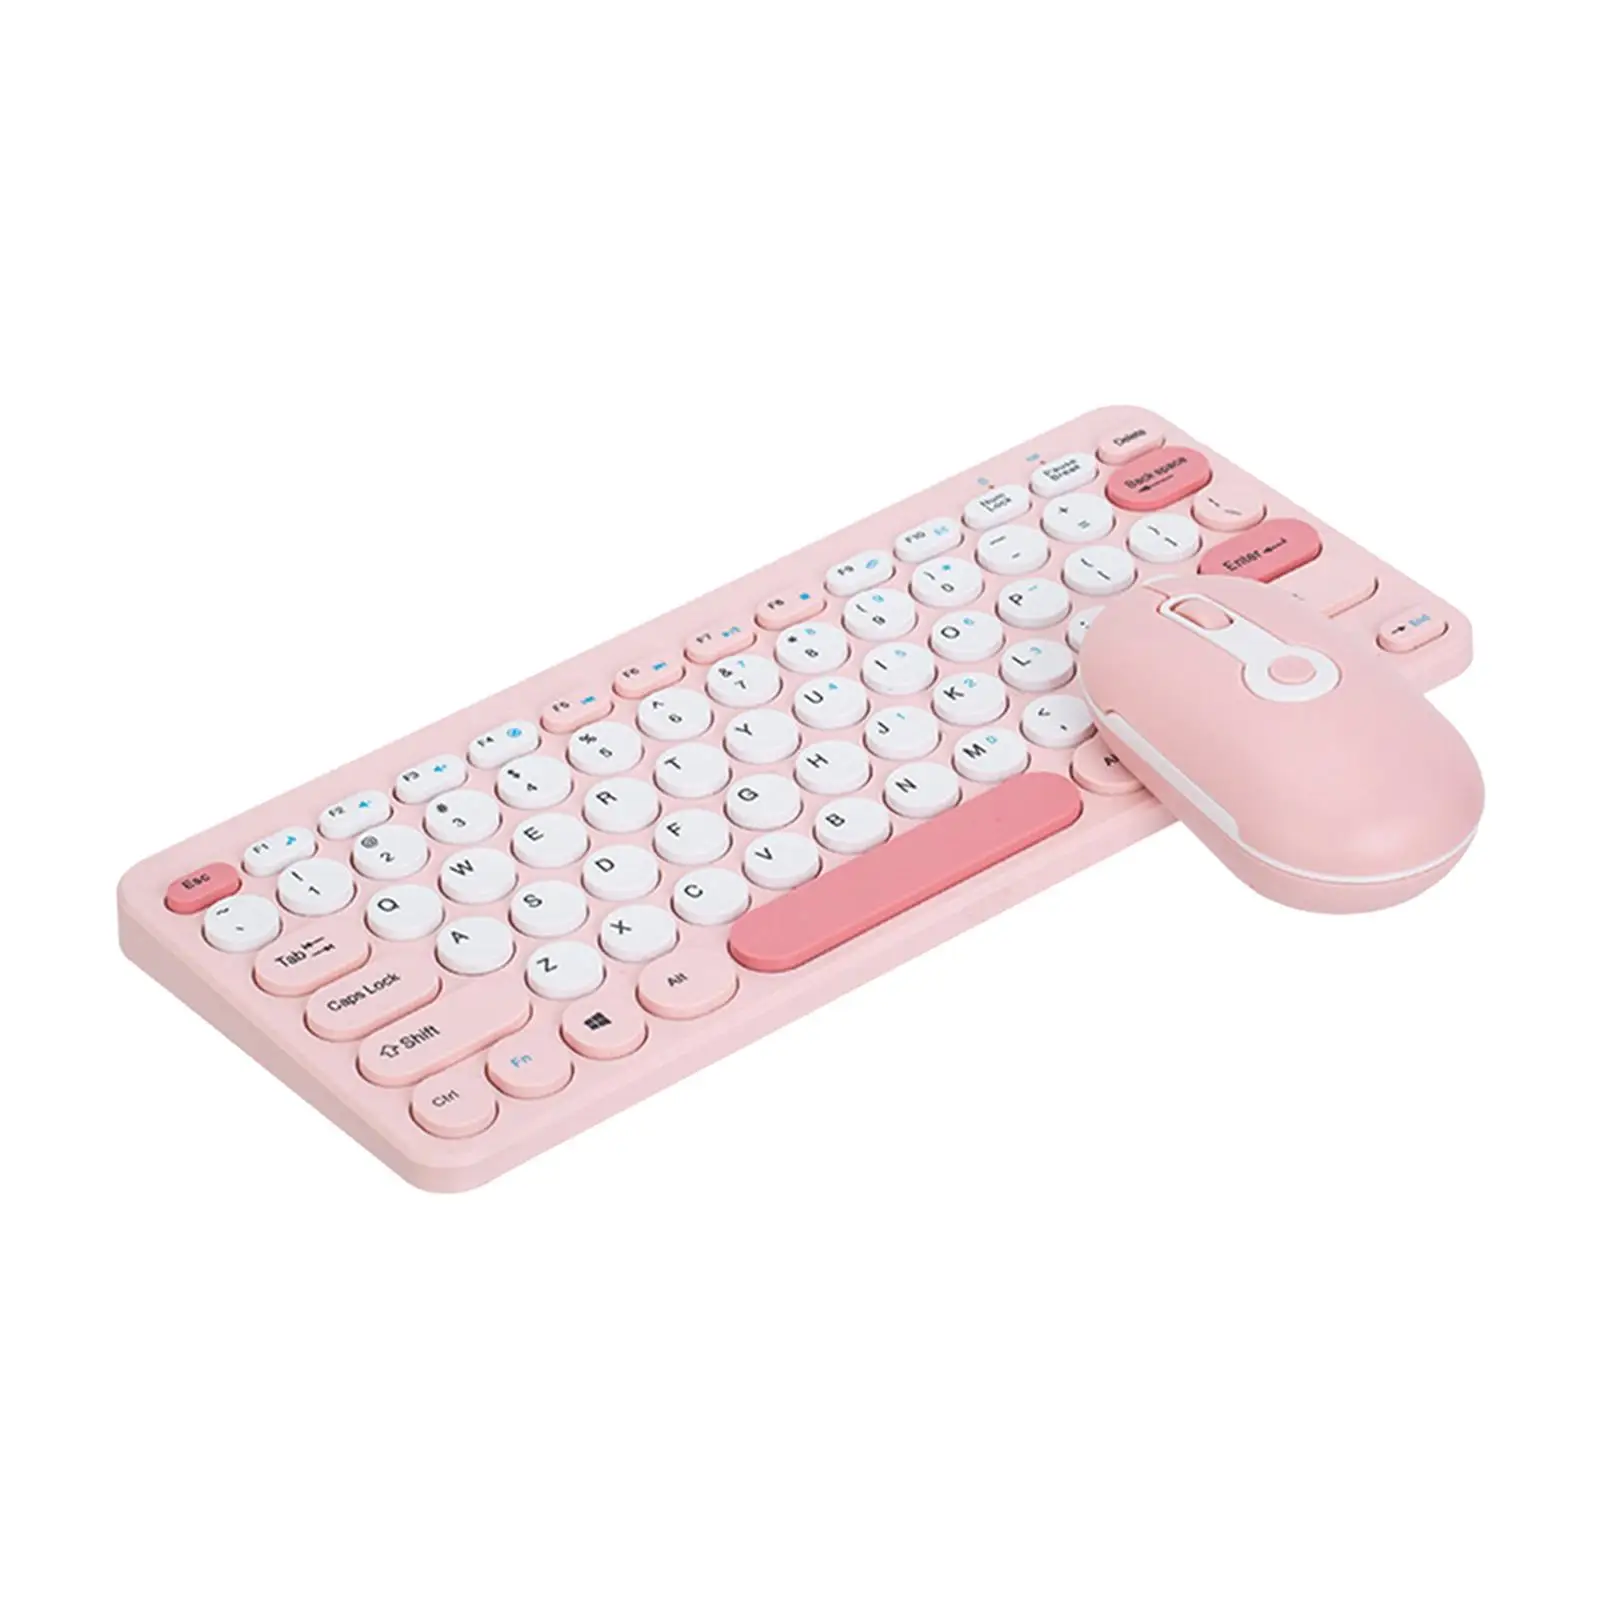 Wireless Computer Keyboard Mouse with USB Receiver Mini Body Cordless USB Keyboard and Mouse for Computer Tablet Desktop PC